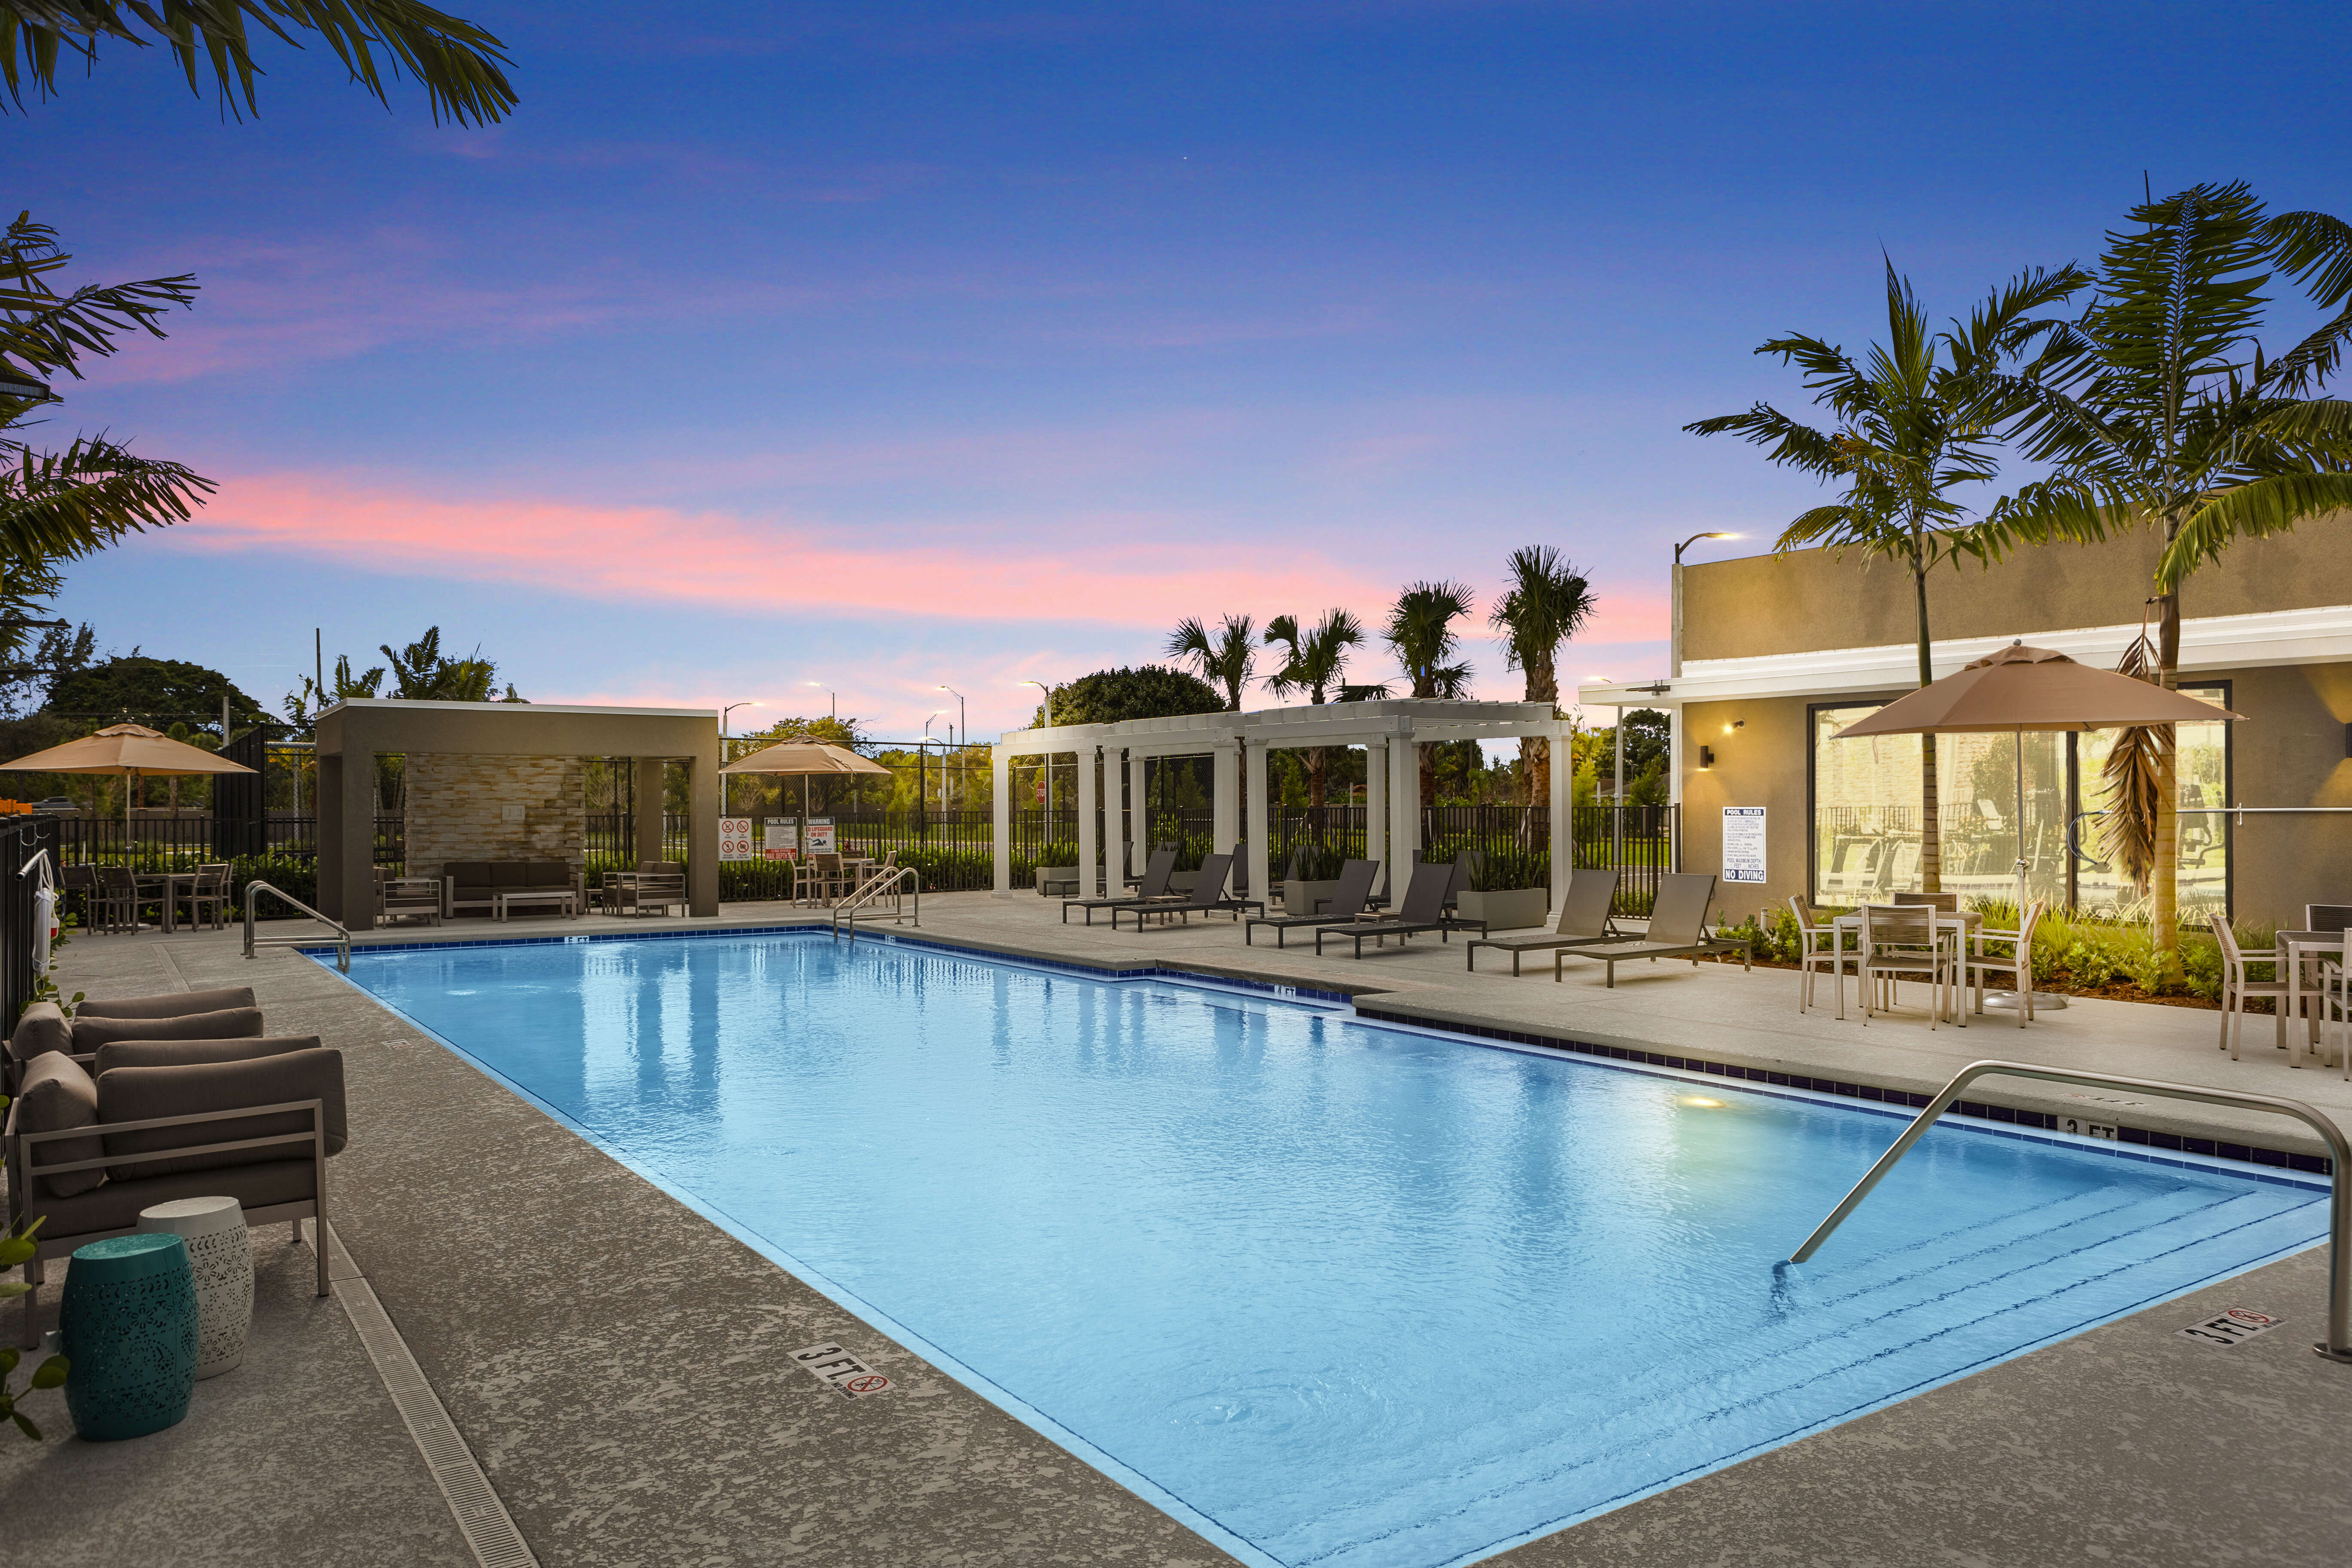 On-site swimming pool at Pine Ridge in West Palm Beach, Florida